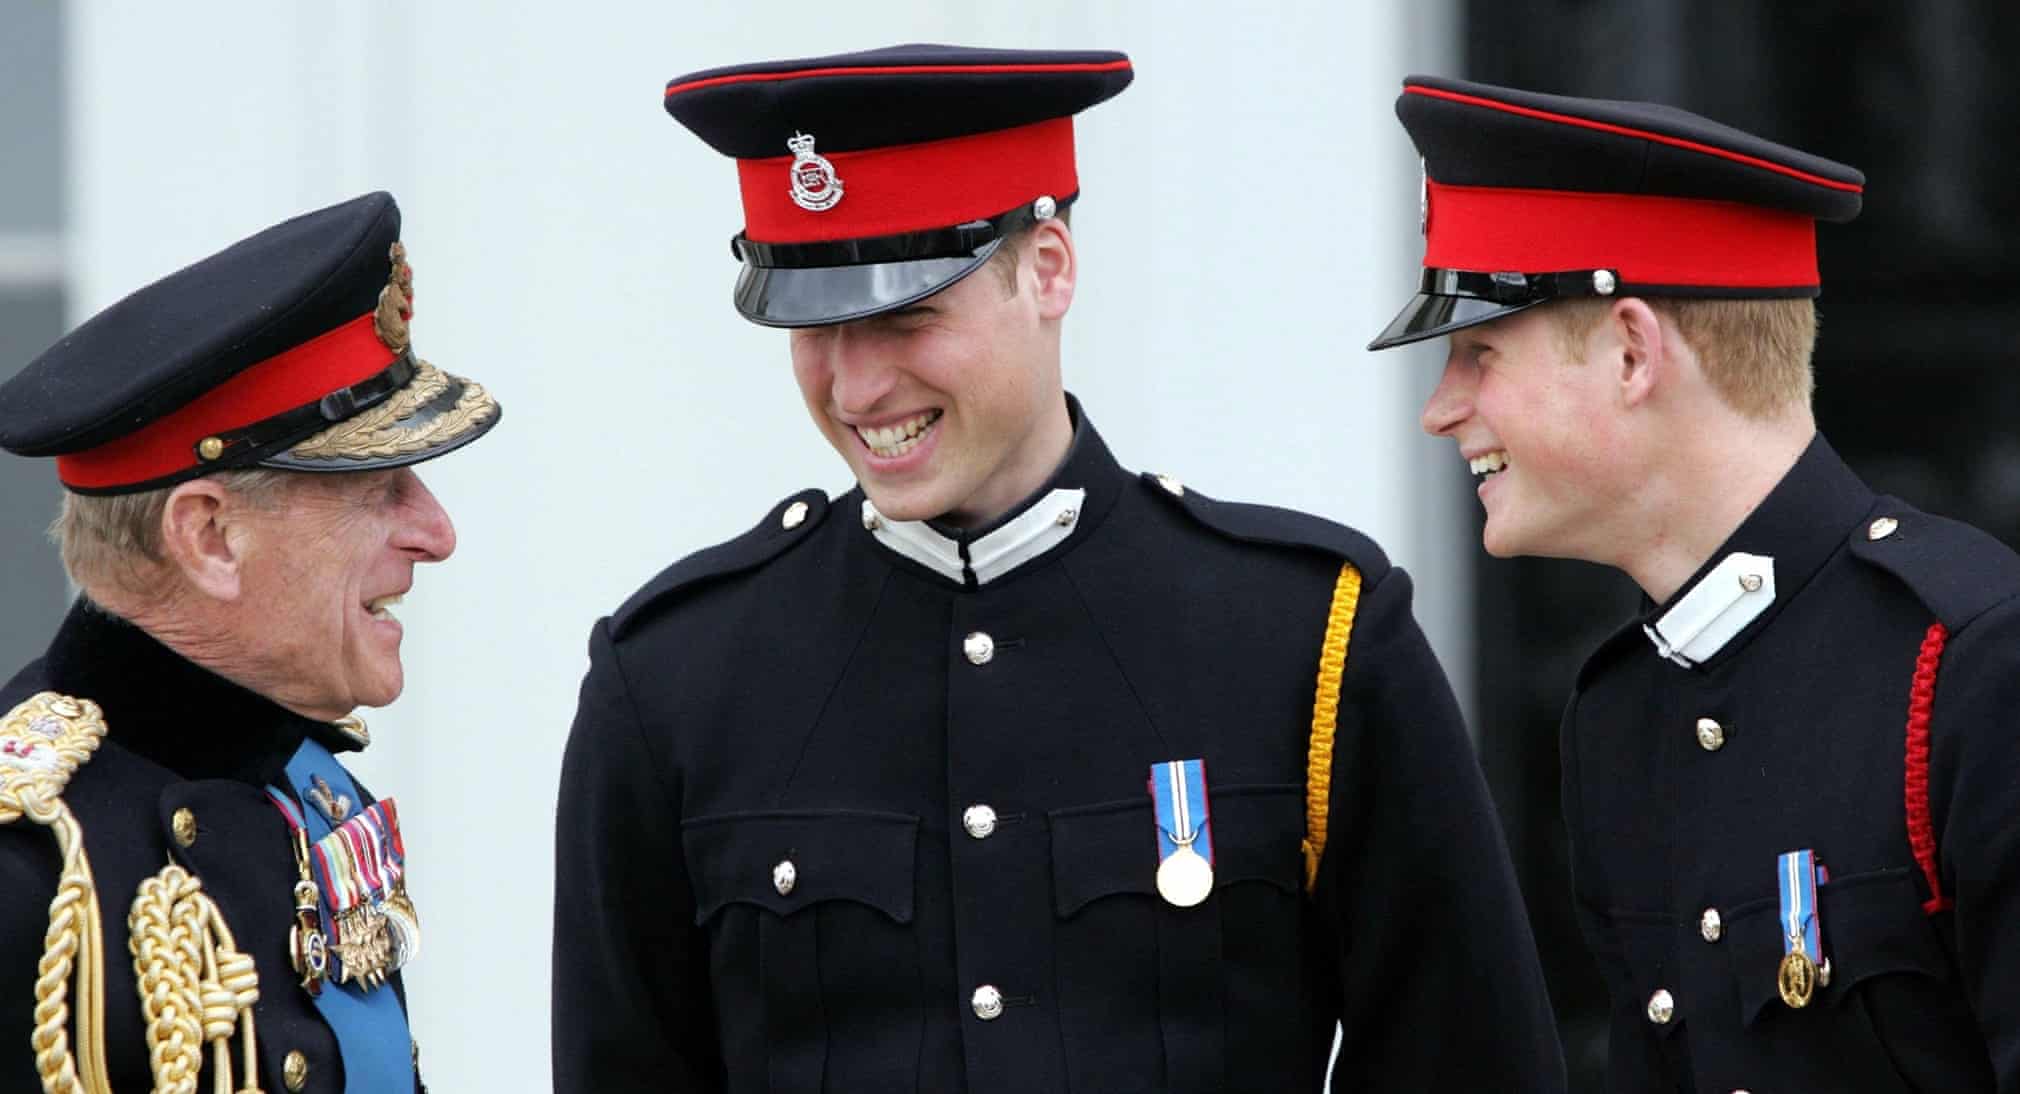 The Duke of Edinburgh speaks to princes William and Harry at Sandhurst after the sovereign’s parade in April 2006. The parade marked the completion of Harry’s officer training. Photograph: PA